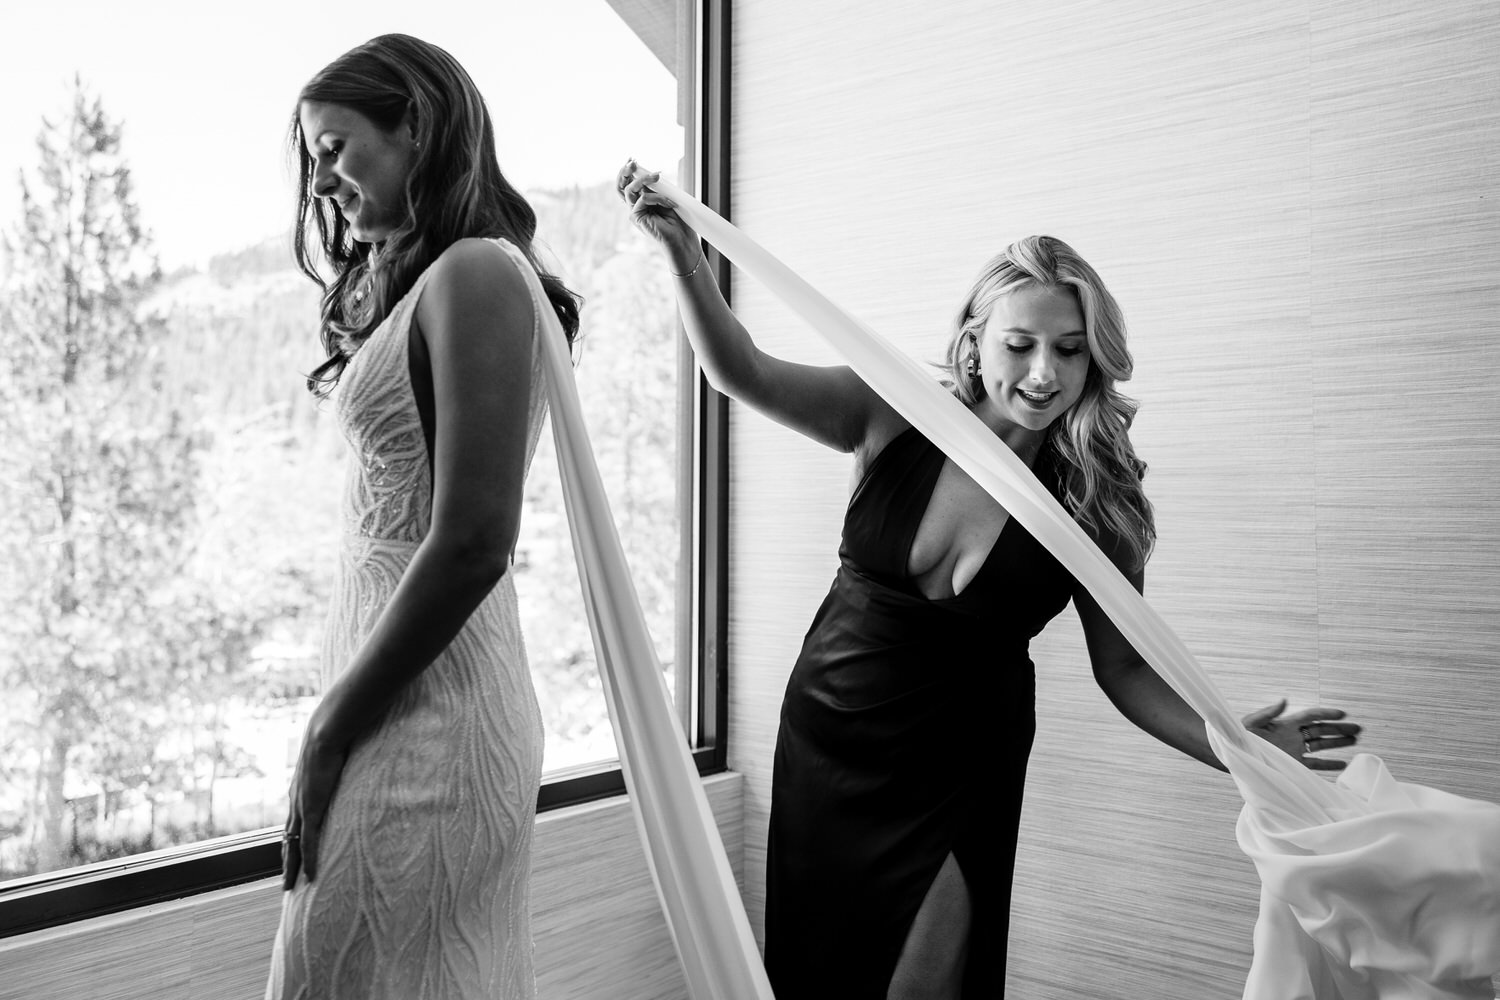 A maid of honor helps pin long, white chiffon bridal wings to the back of the bride's dress.